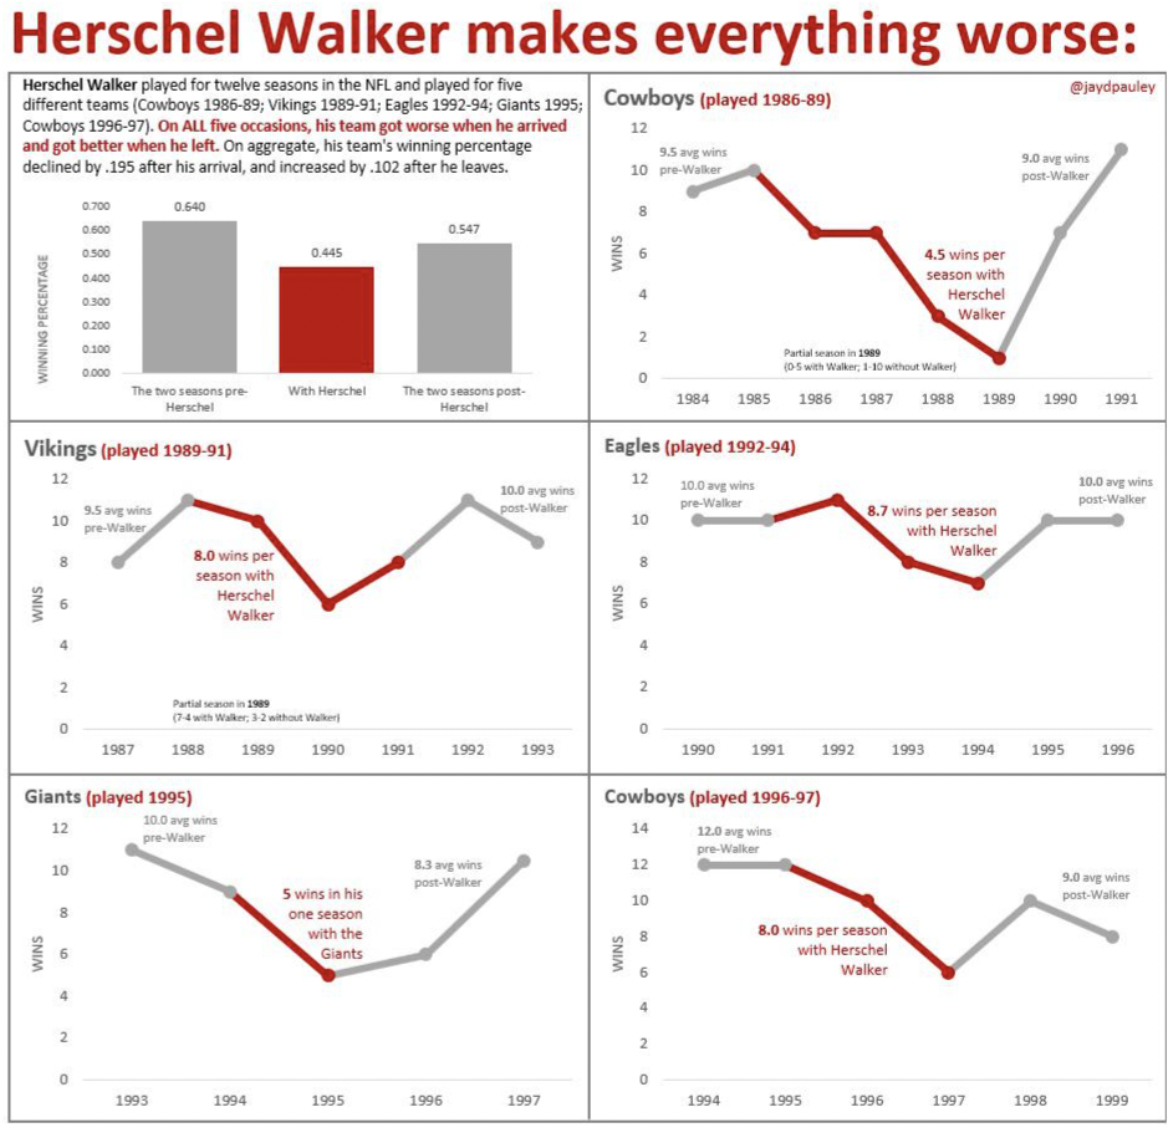 diagram - Herschel Walker makes everything worse Herschel Walker played for twelve seasons in the Nfl, and played for five different teams Cowboys 198689, Vikings 198991, Eagles 199294 Giants 1995. Cowboys played 198689 Cowboys 199697, On All five occasio